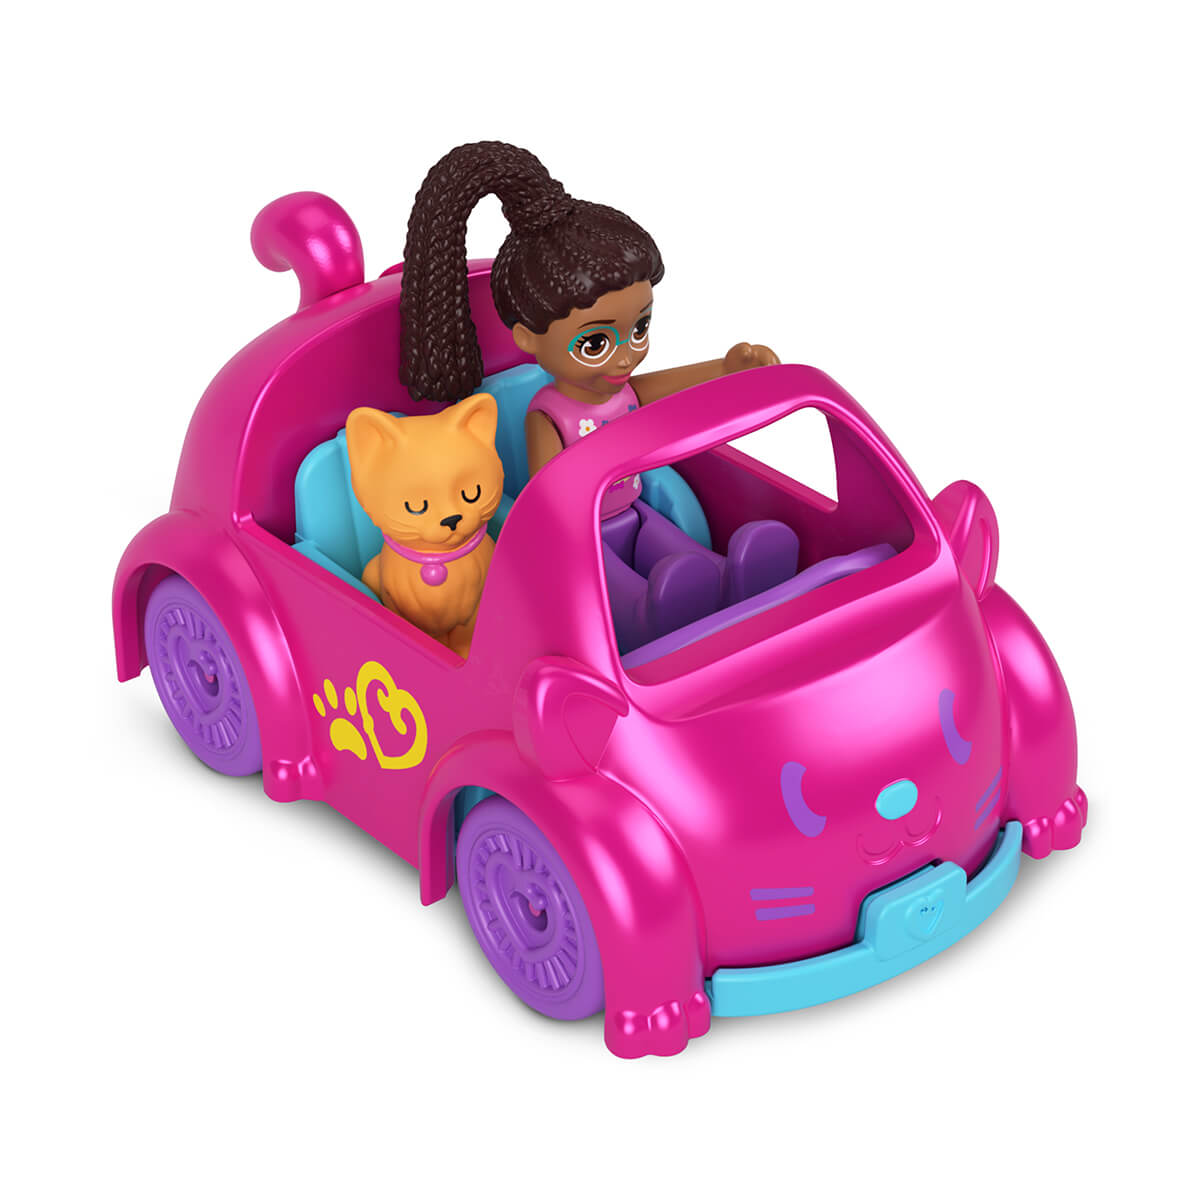 Polly Pocket and cat riding in convertible